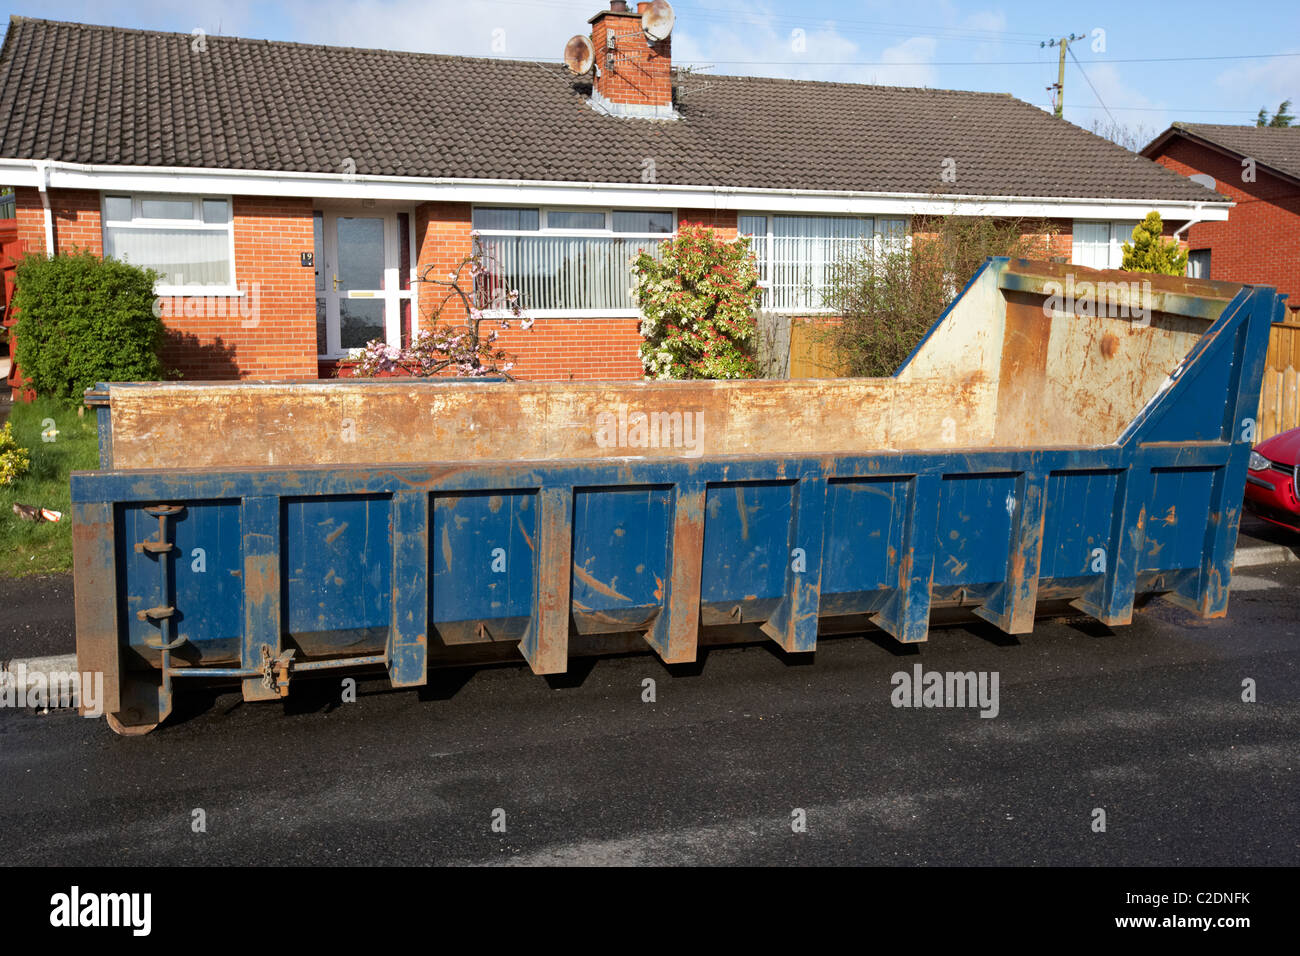 large roll on off building skip placed outside a row of houses in the uk Stock Photo